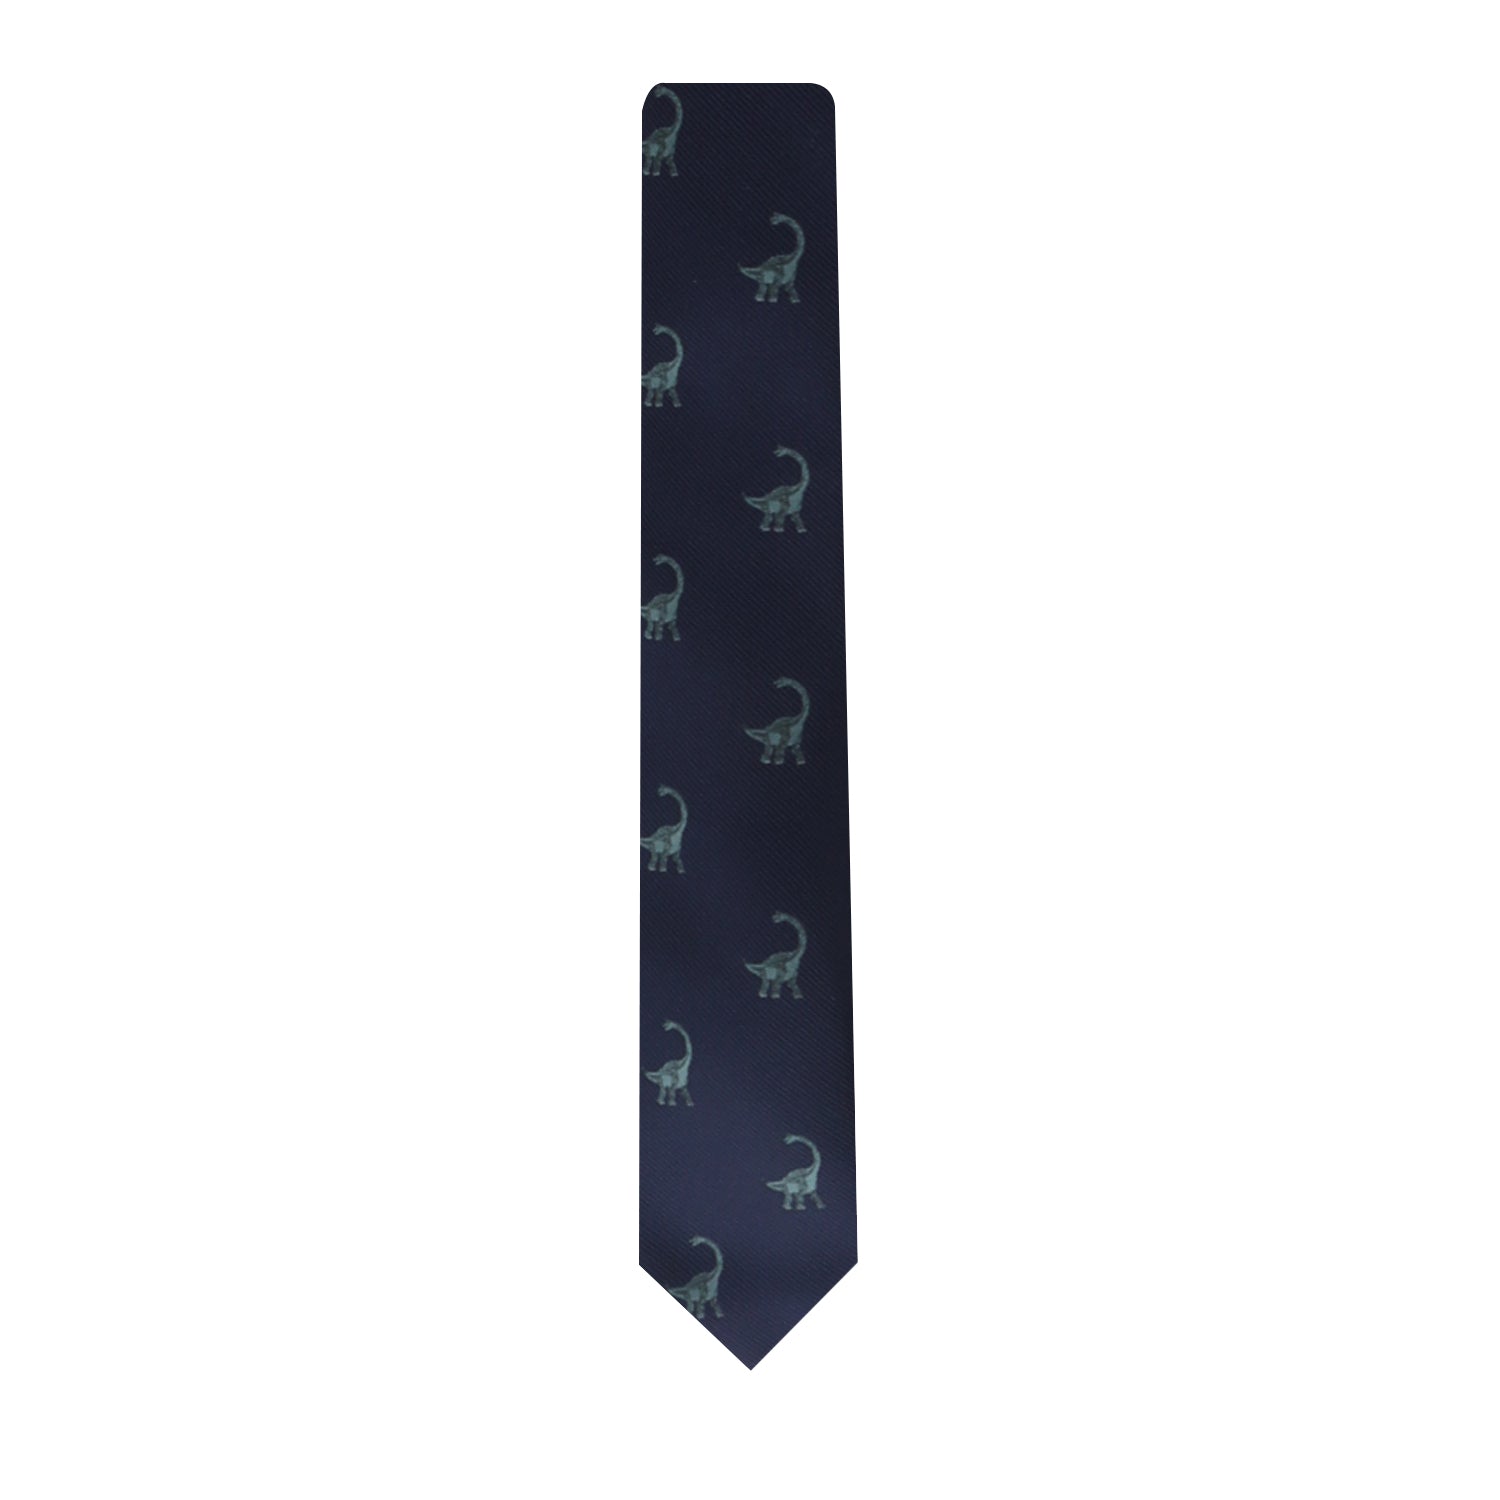 A tie with a Brontosaurus Skinny Tie on it.